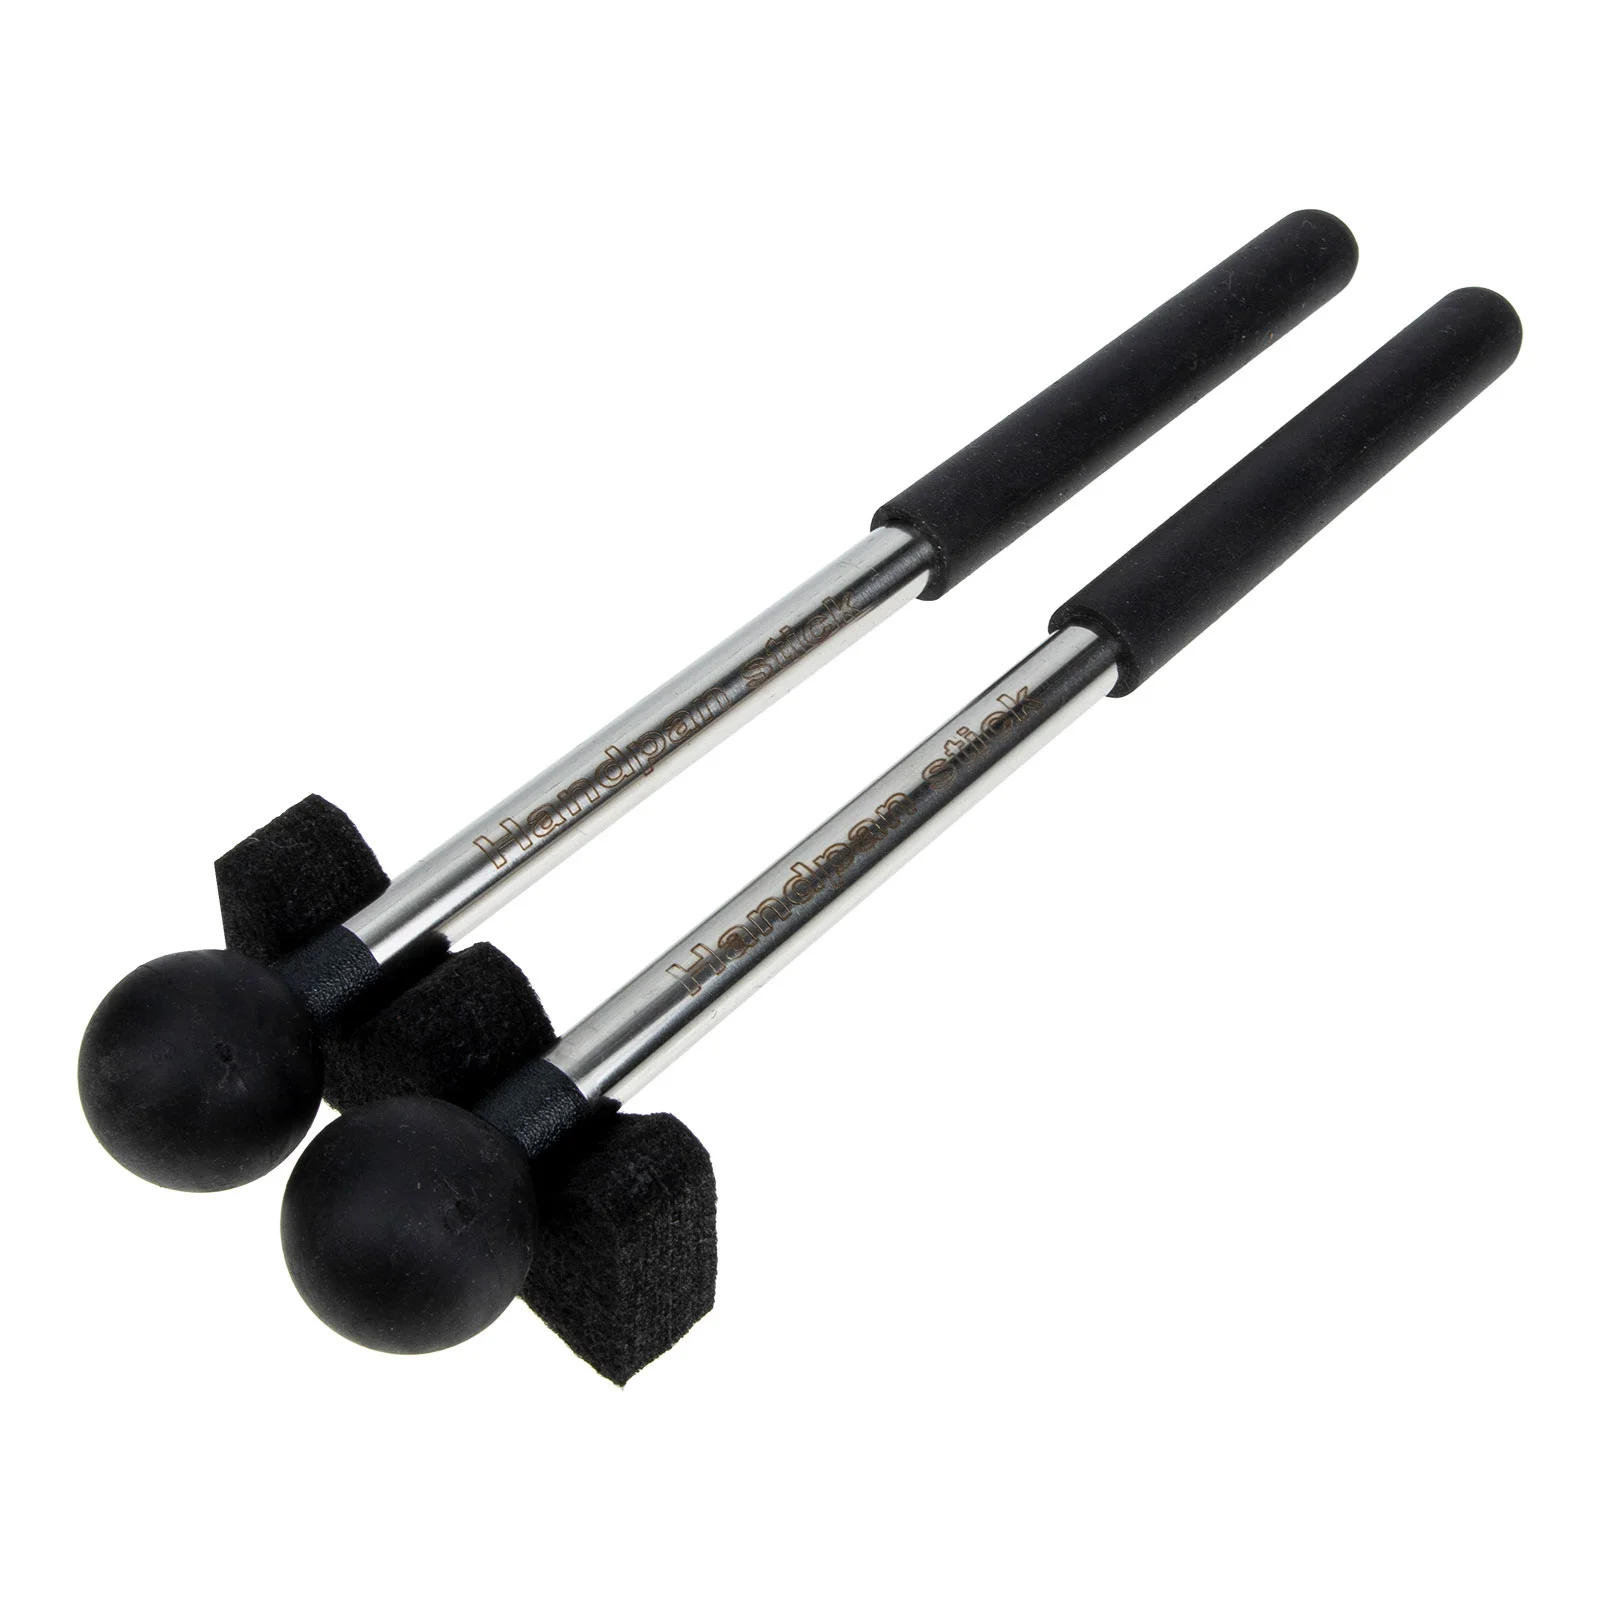 

Drum Tongue Mallets Drumsticks Sticks Rubber Stick Musical Drumstick Instrument Percussion Mallet Steel Tenor Bell Performance